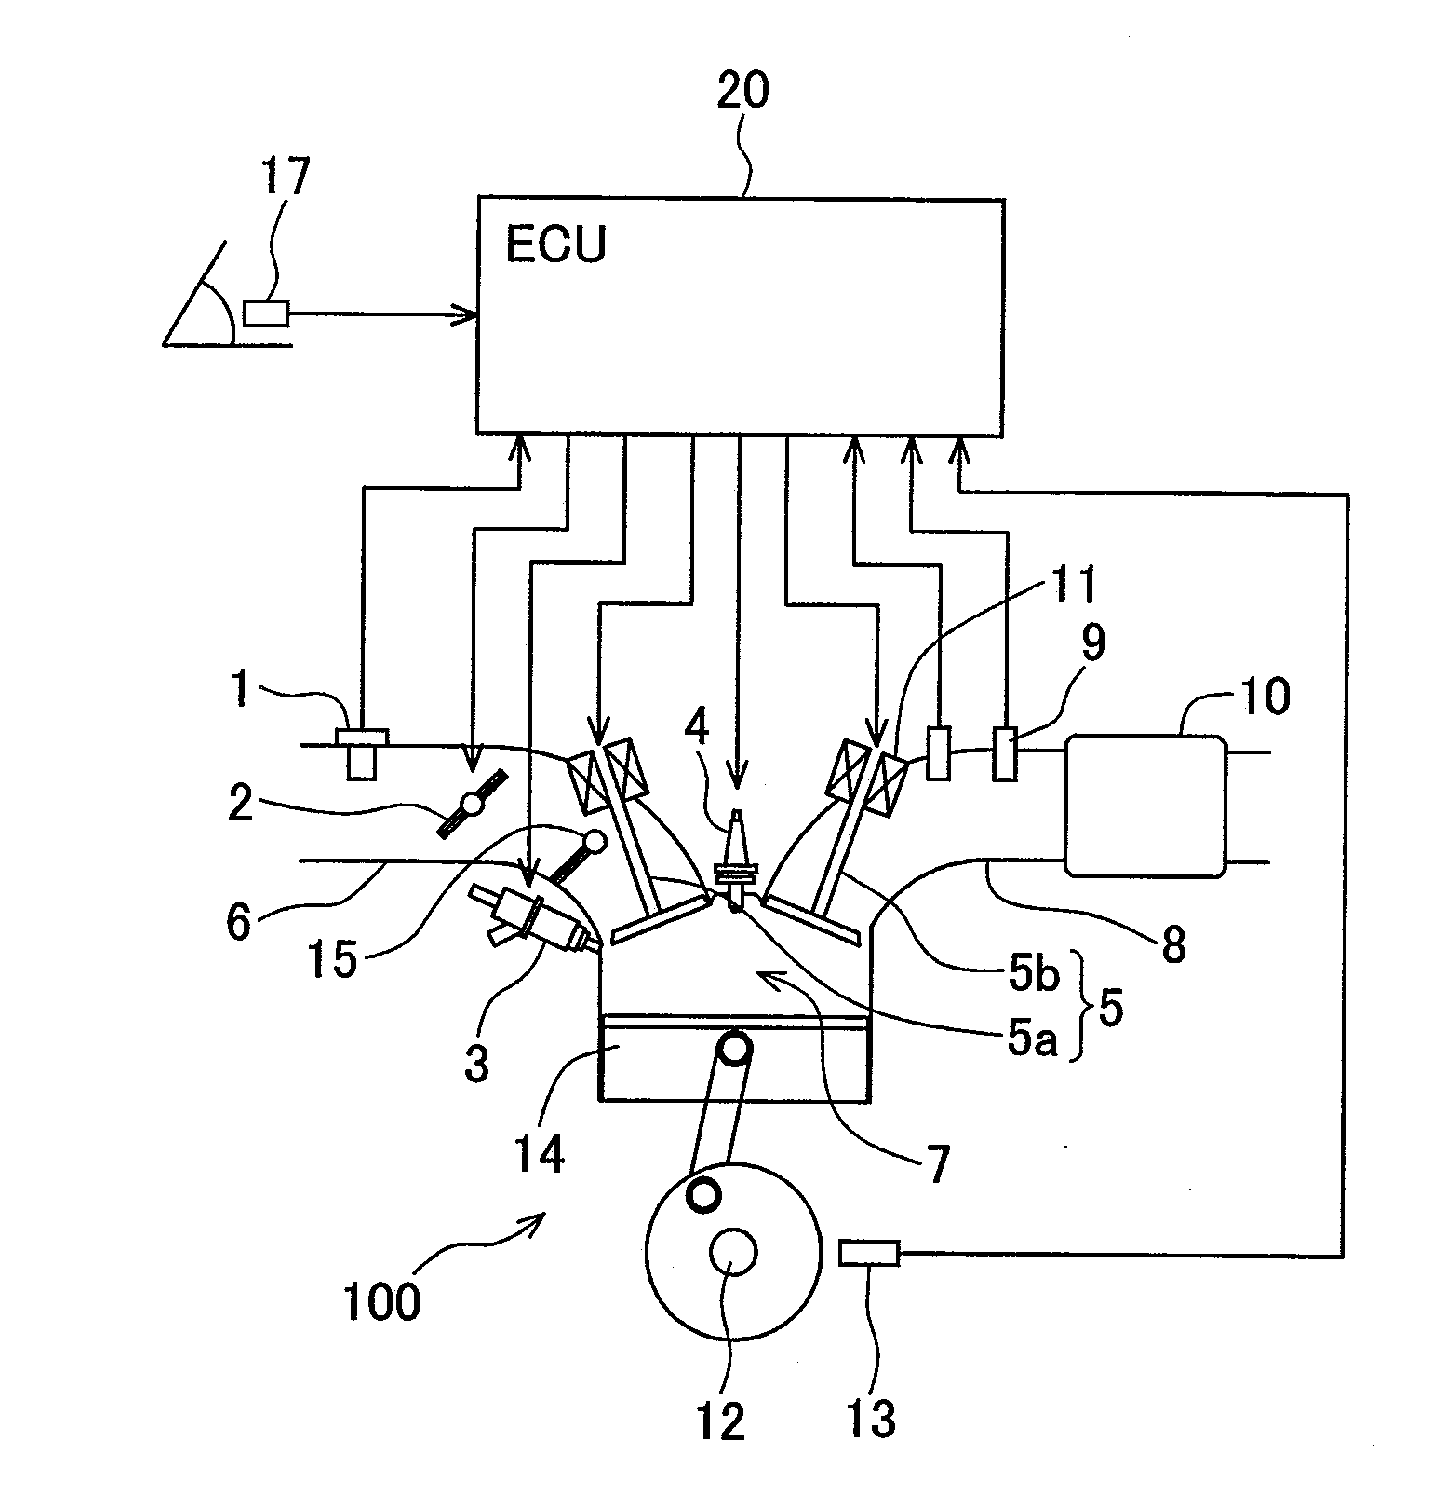 Apparatus and method for Controlling a Homogeneous Charge Compression-Ignited Internal-Combustion Engine